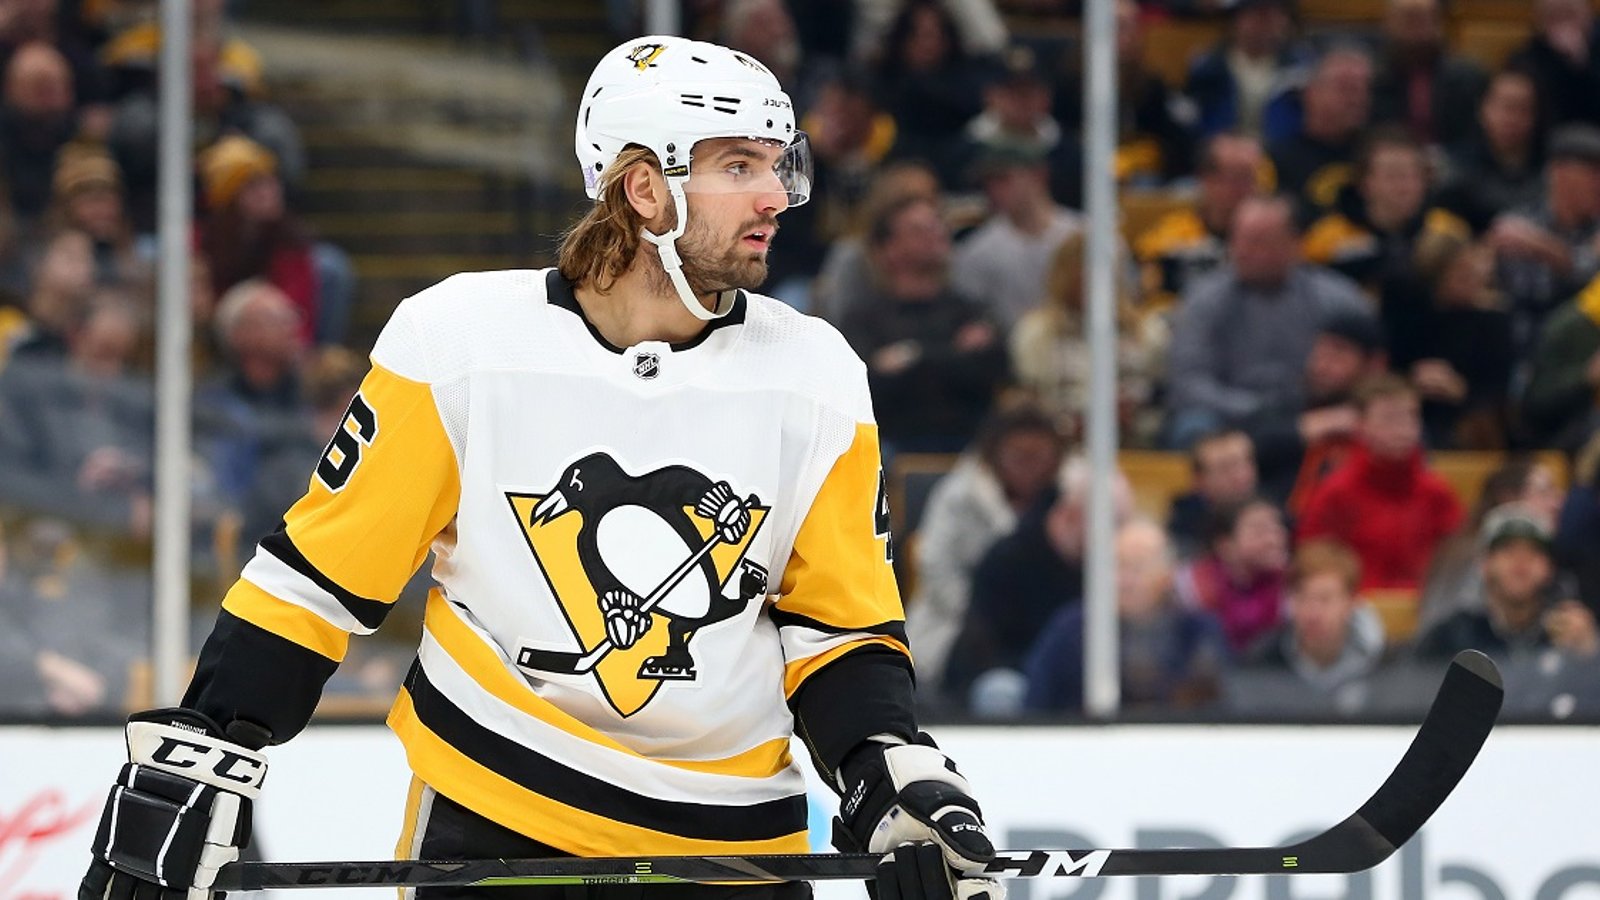 Breaking: Penguins work out last minute deal with Zach Aston-Reese.